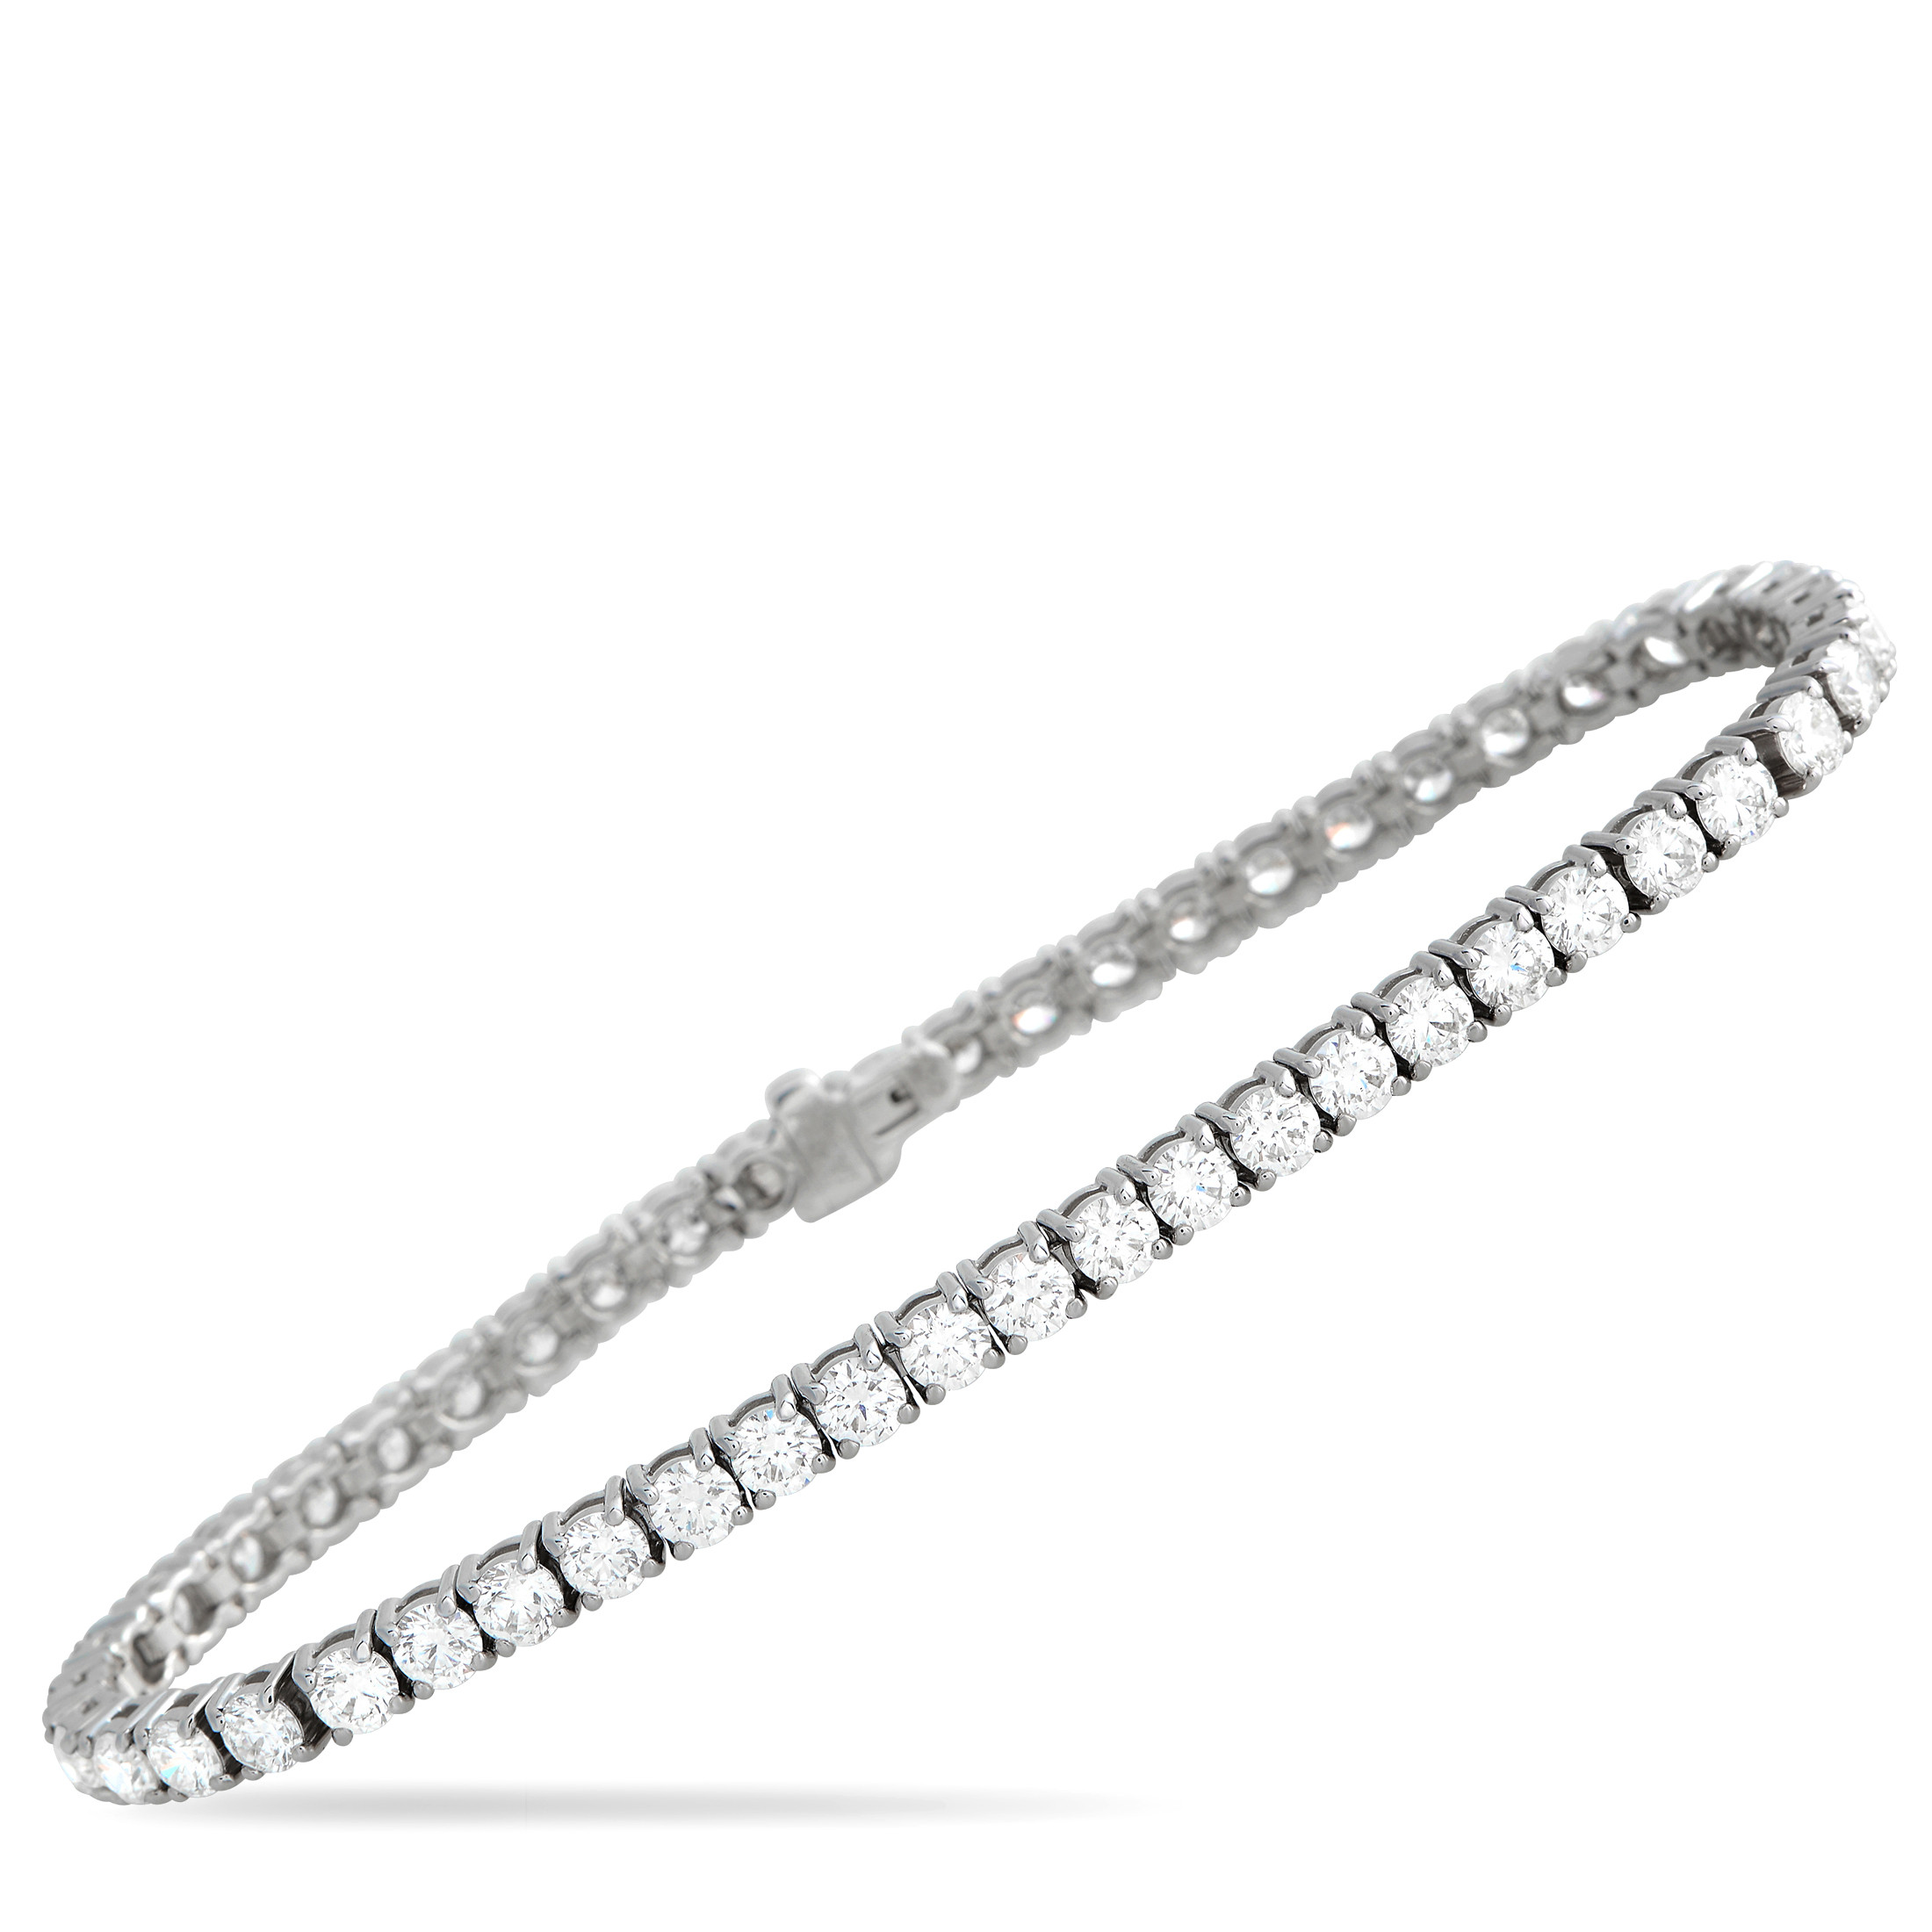 A series of round-cut Diamonds with a total weight of 7.50 carats makes this tennis bracelet simply unforgettable. Crafted from 18K White Gold, it measures 7.25” long and comes complete with secure box tab clasp closure. This jewelry piece is offered in brand new condition and includes a gift box.